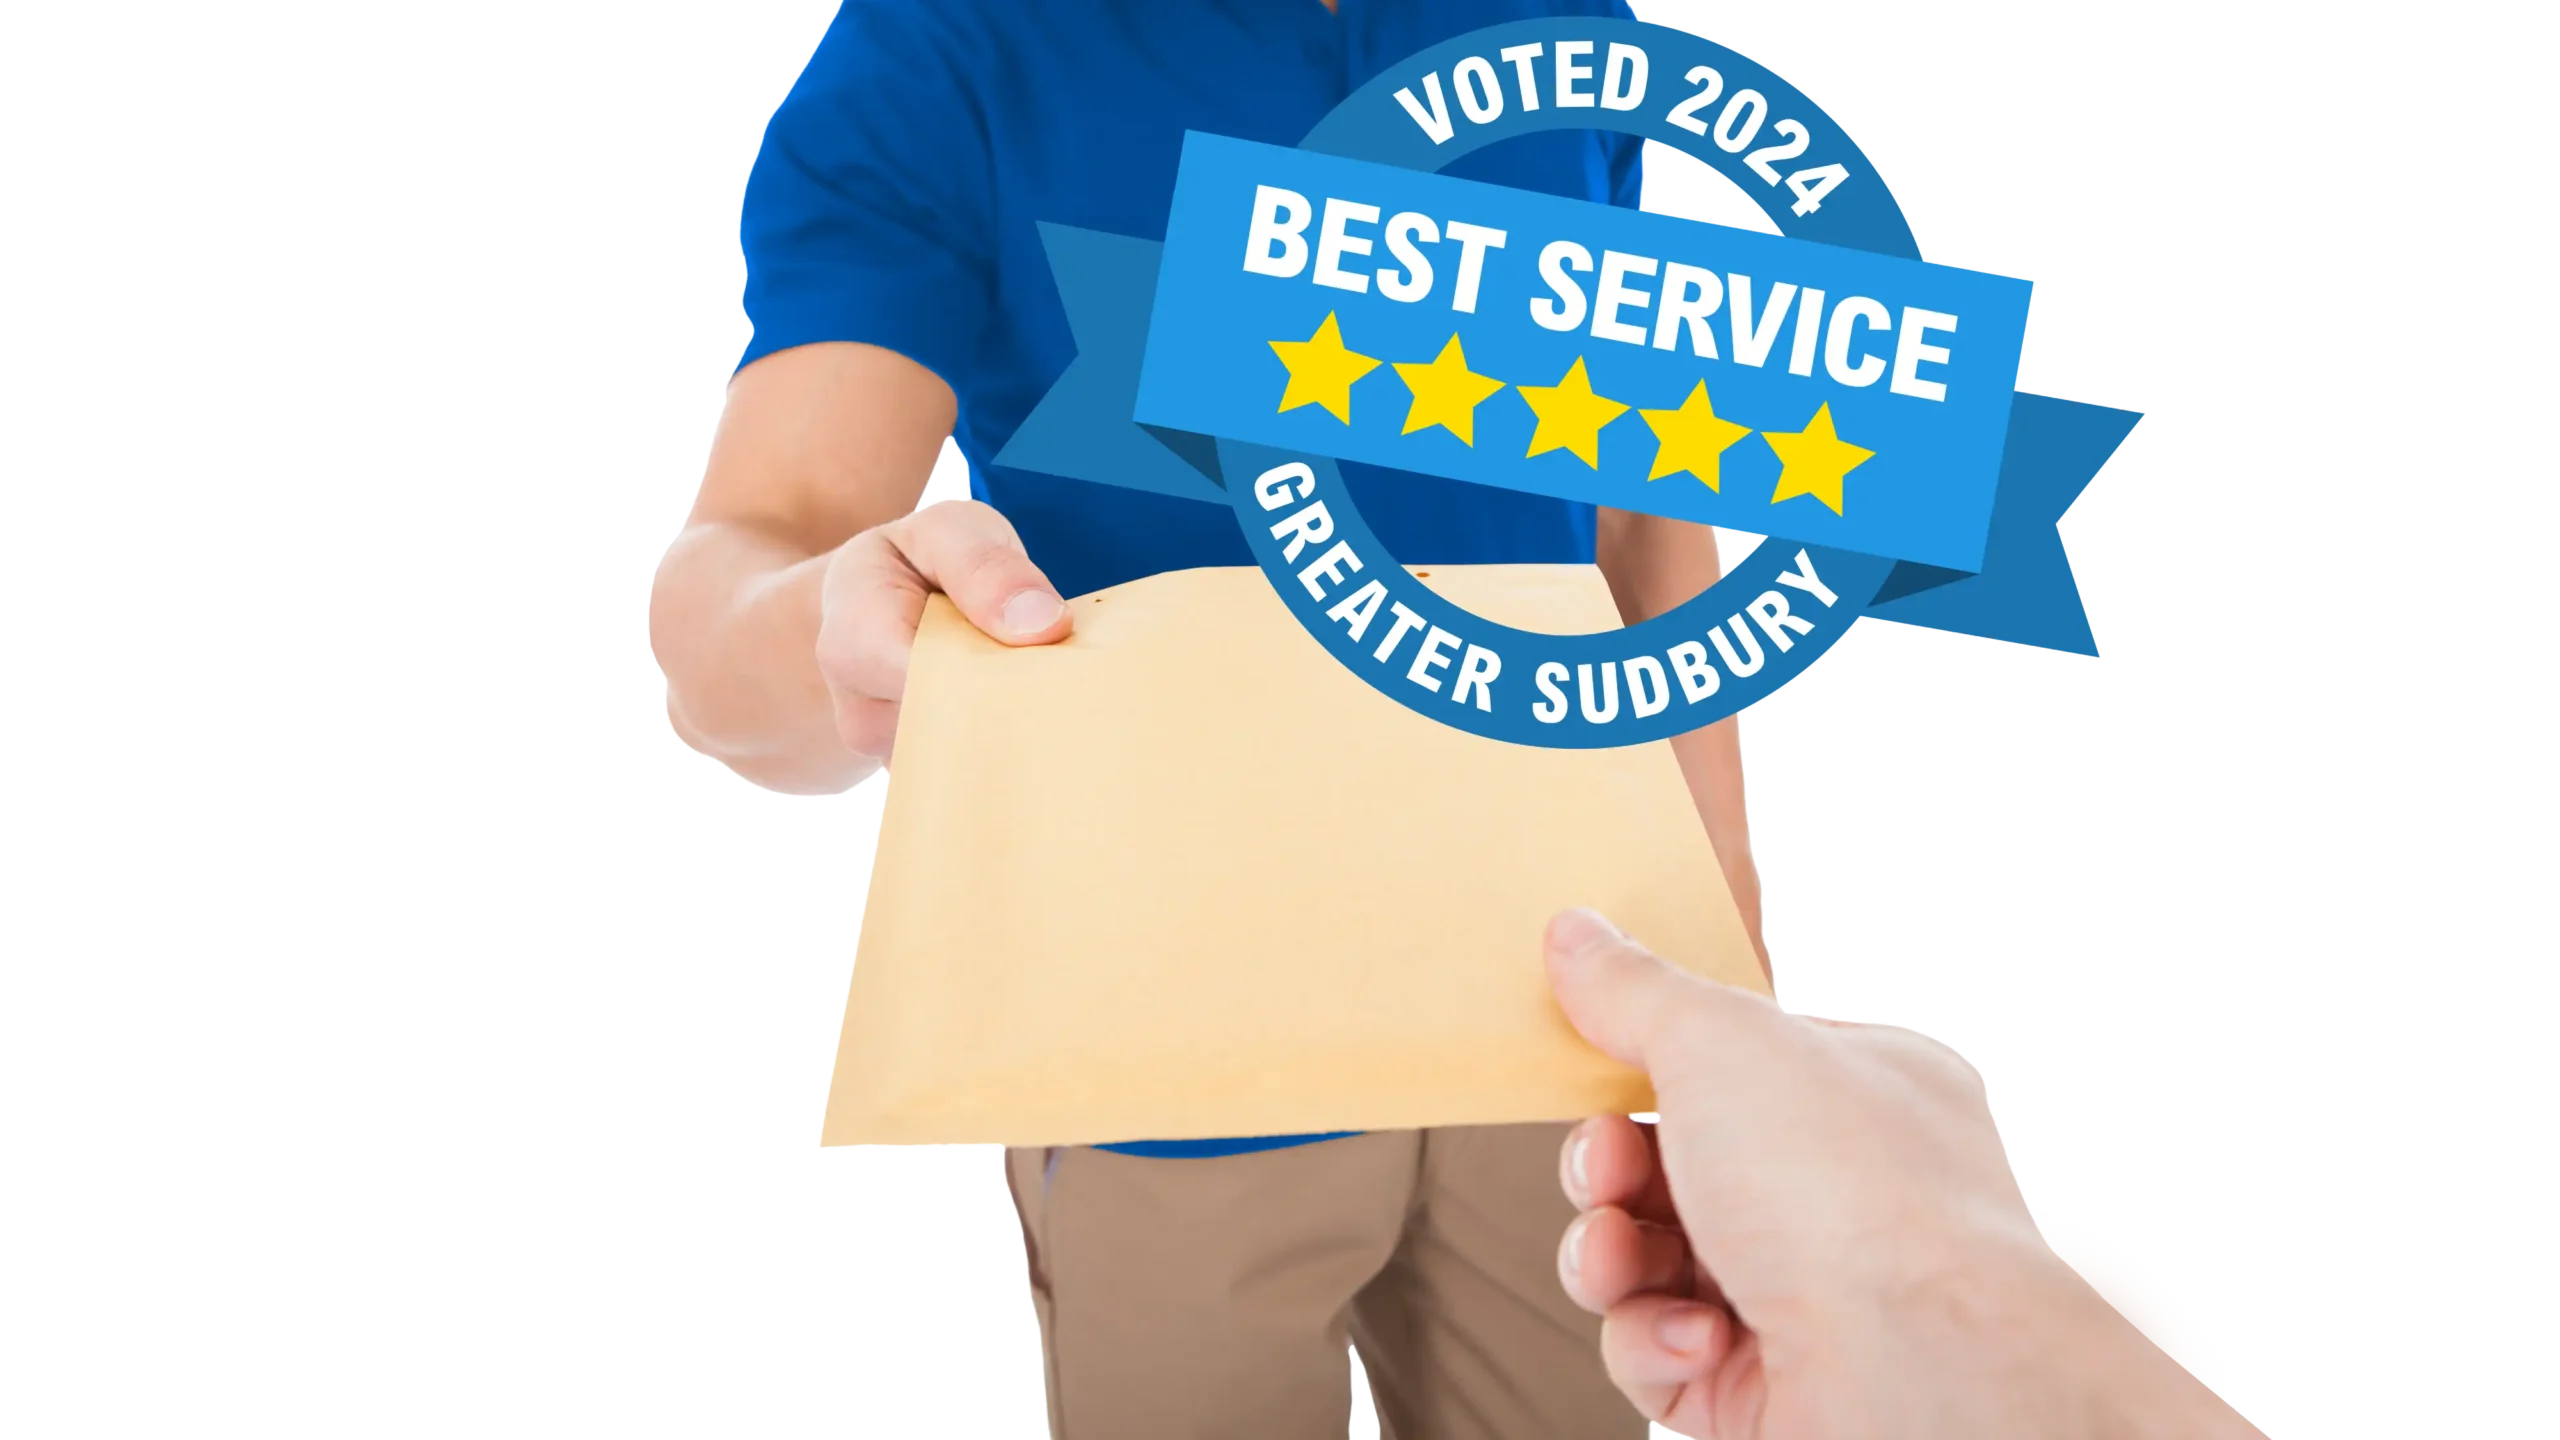 Process Server Sudbury Ontario Wide Process Serving Best Service in 2024 as voted by customers